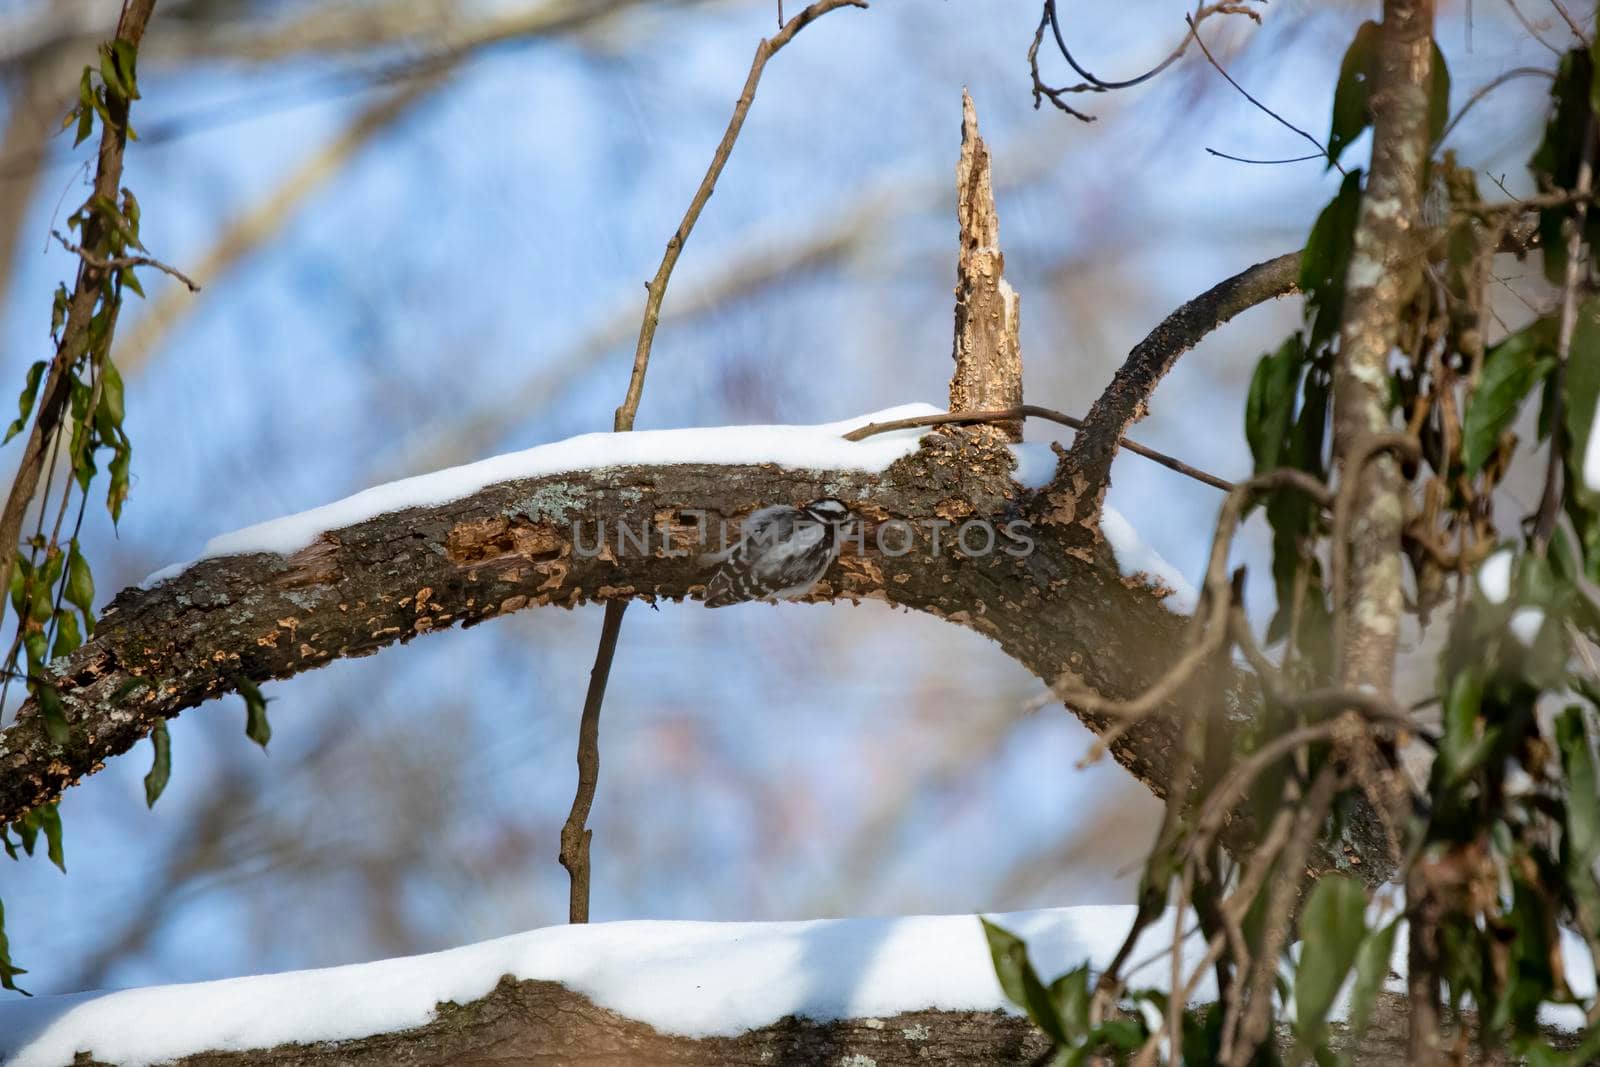 Female downy woodpecker (Picoides pubescens) foraging along the side of a snow-covered tree limb